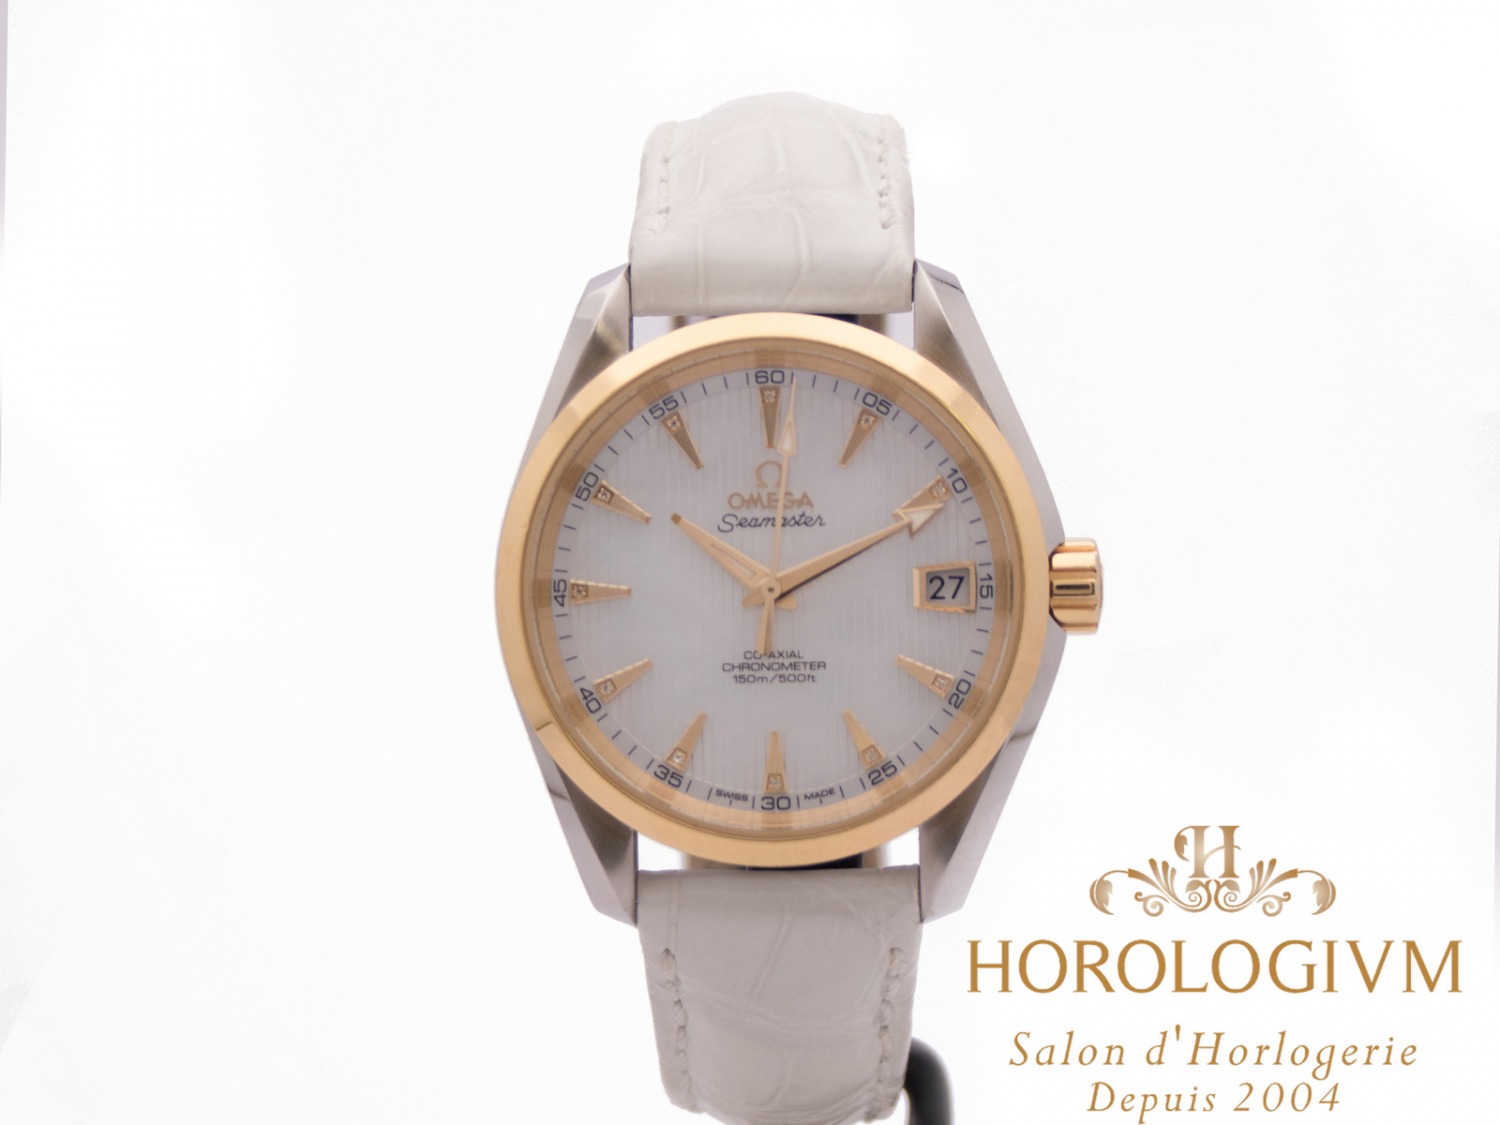 Omega Seamaster Aqua Terra 38MM Ref. 23123392155002 watch, two-tone (bi-colored) silver (case) and yellow gold (bezel)